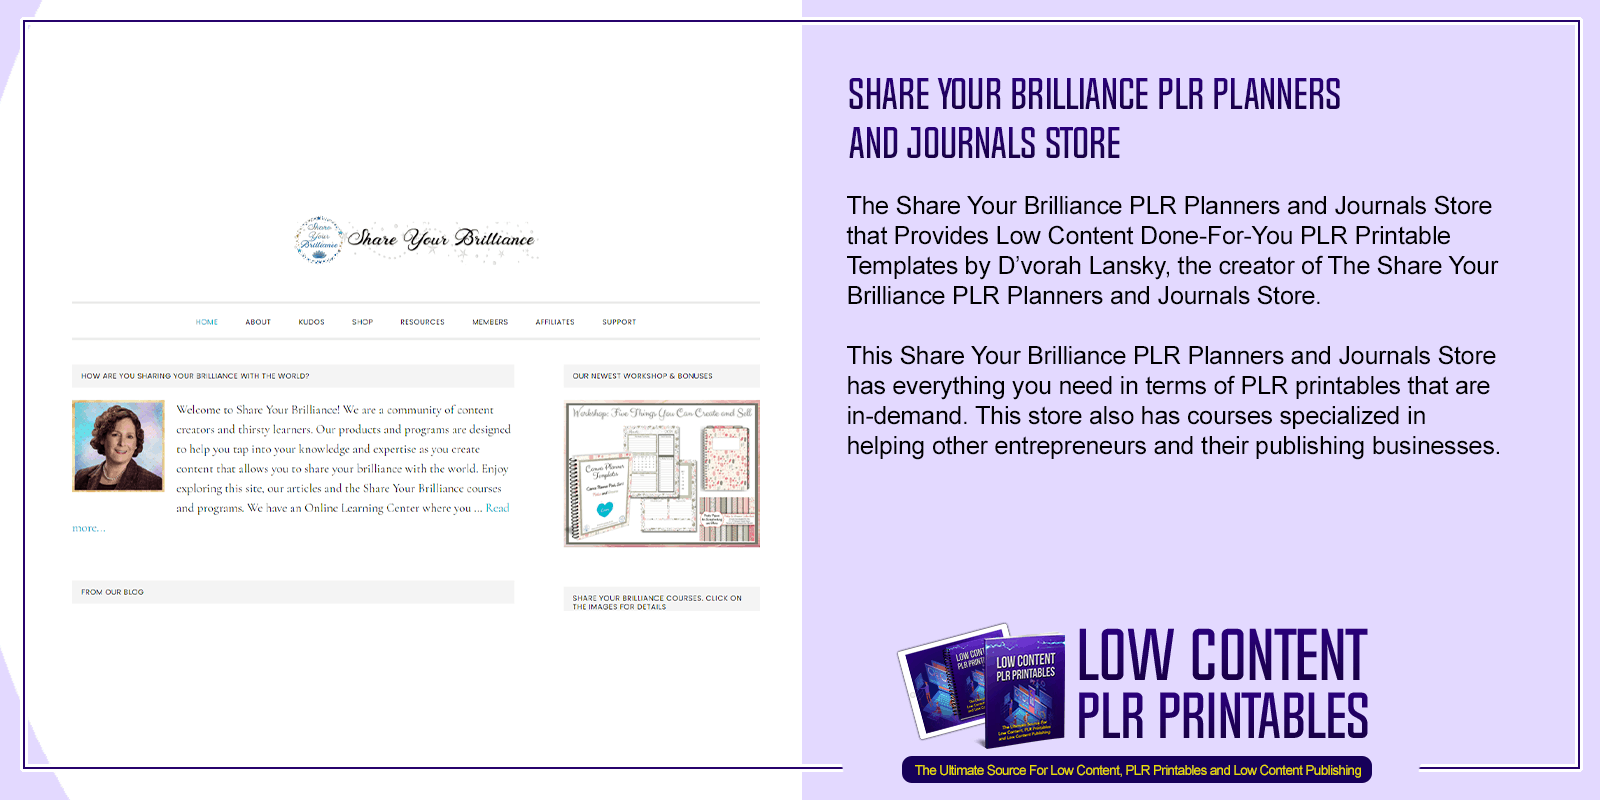 Share Your Brilliance PLR Planners and Journals Store